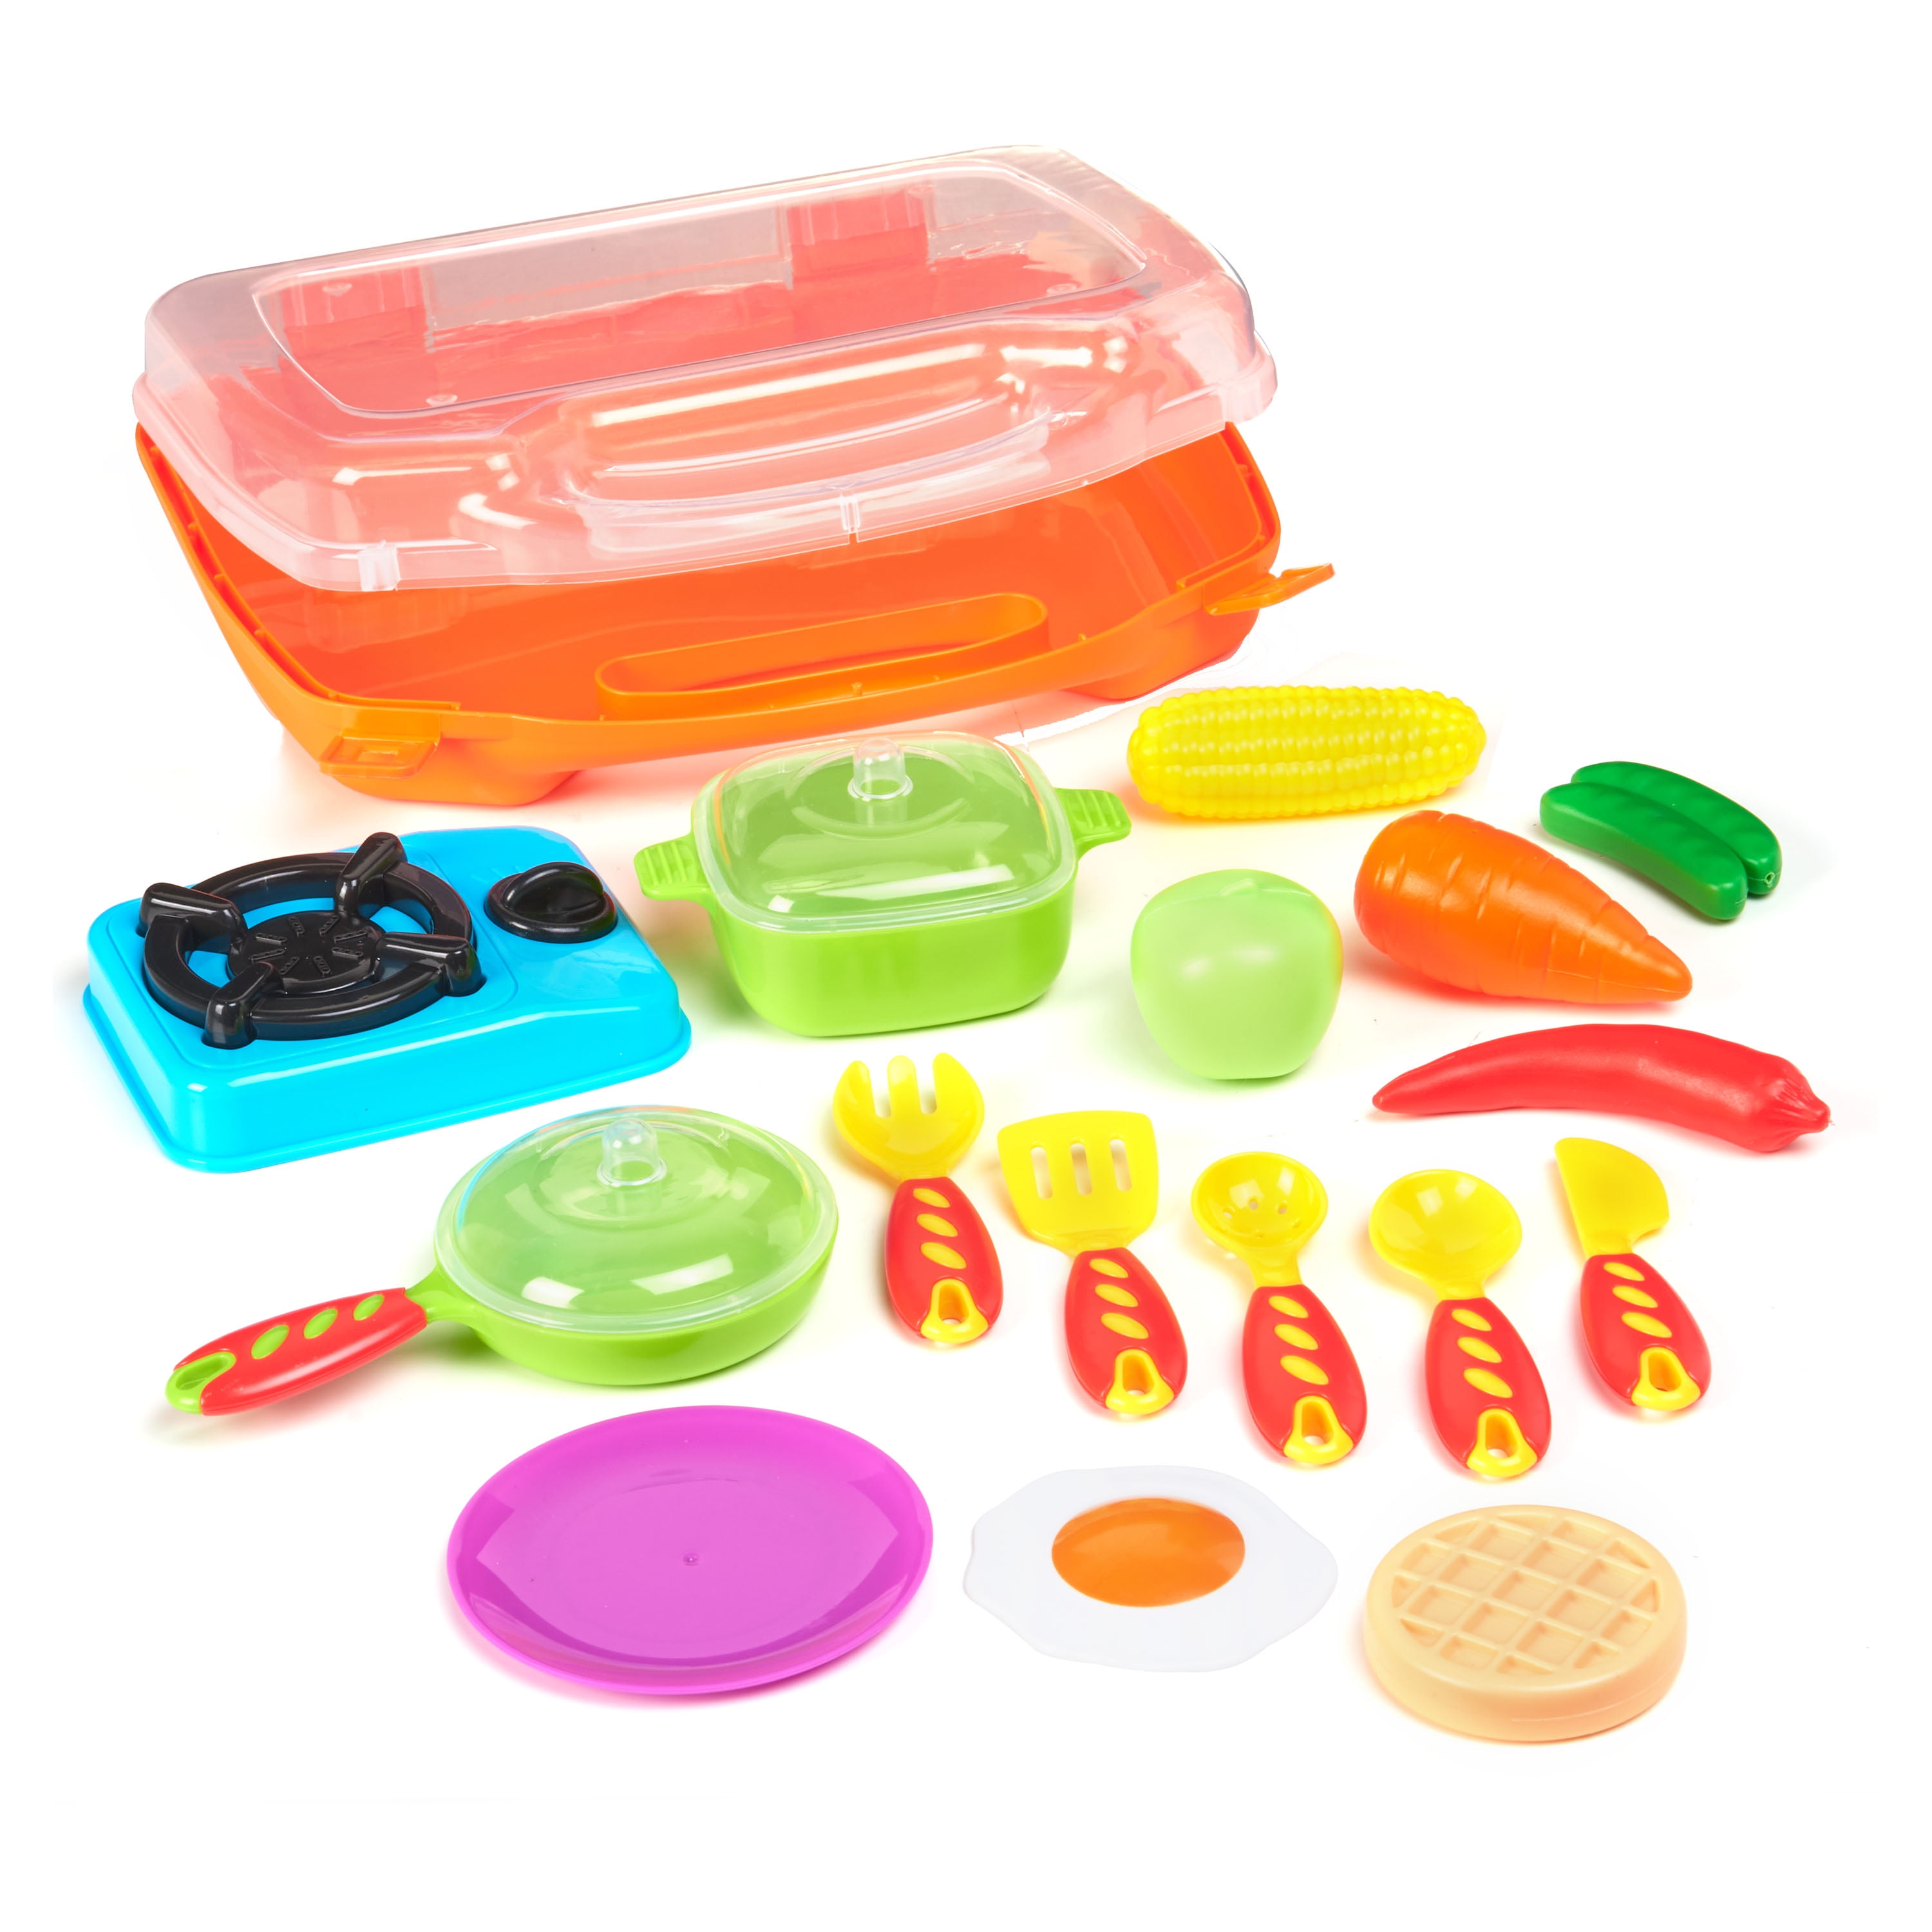 Kid Connection Kitchen Play Set, 19 Pieces, Play Cooking & Baking Toys. For ages 3+